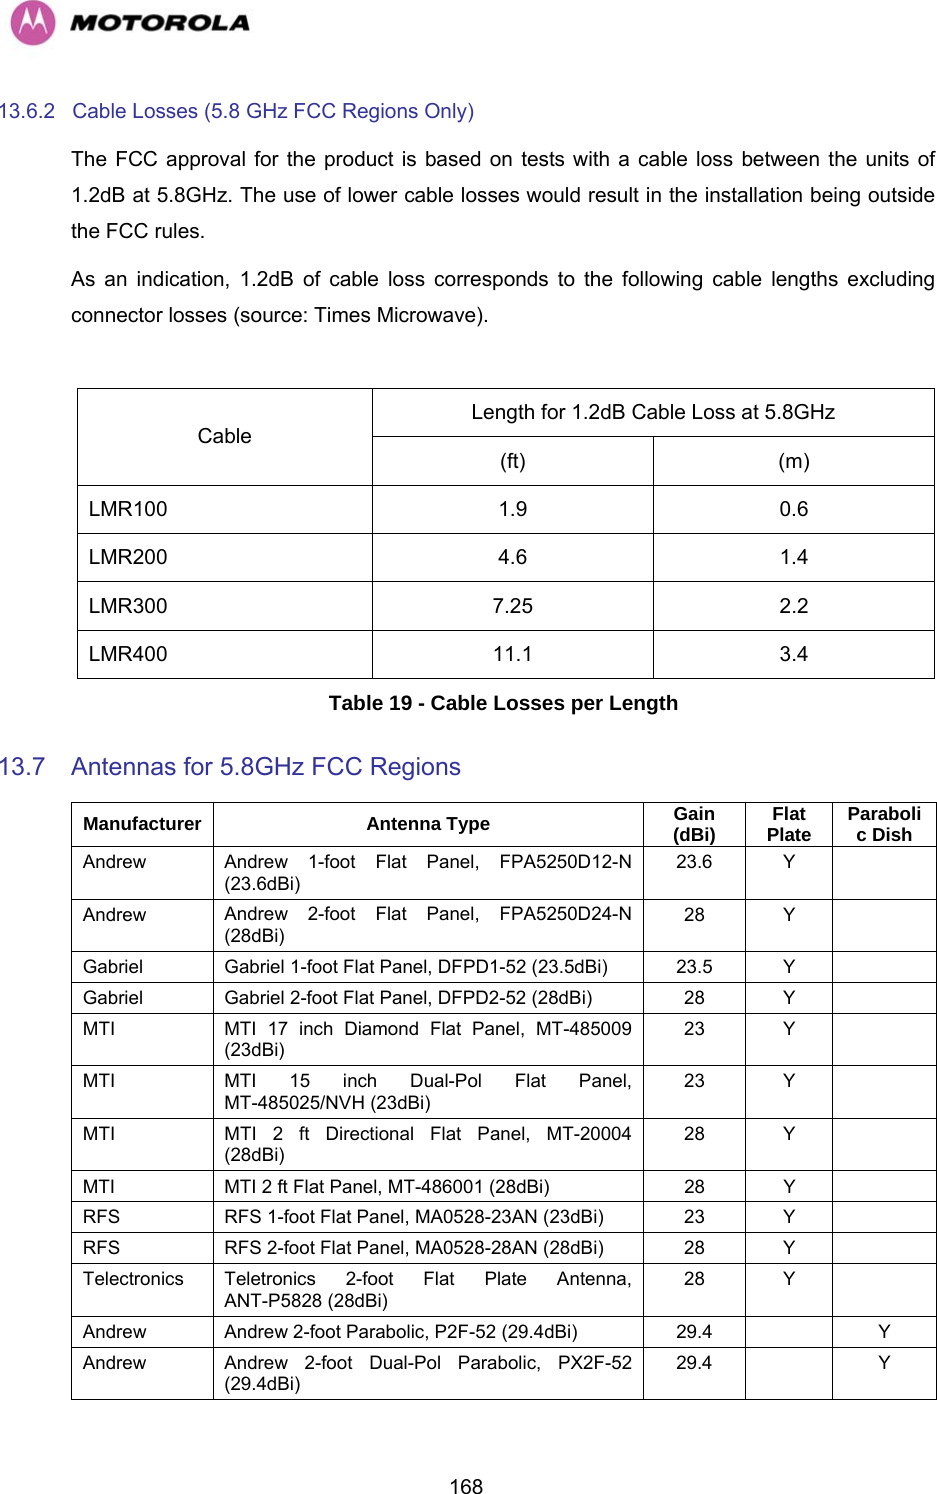   16813.6.2  Cable Losses (5.8 GHz FCC Regions Only) The FCC approval for the product is based on tests with a cable loss between the units of 1.2dB at 5.8GHz. The use of lower cable losses would result in the installation being outside the FCC rules. As an indication, 1.2dB of cable loss corresponds to the following cable lengths excluding connector losses (source: Times Microwave).  Length for 1.2dB Cable Loss at 5.8GHz Cable (ft) (m) LMR100 1.9 0.6 LMR200 4.6 1.4 LMR300 7.25 2.2 LMR400 11.1 3.4 Table 19 - Cable Losses per Length 13.7  Antennas for 5.8GHz FCC Regions Manufacturer Antenna Type  Gain (dBi)  Flat Plate  Parabolic Dish Andrew  Andrew 1-foot Flat Panel, FPA5250D12-N (23.6dBi) 23.6 Y   Andrew  Andrew 2-foot Flat Panel, FPA5250D24-N (28dBi) 28 Y   Gabriel  Gabriel 1-foot Flat Panel, DFPD1-52 (23.5dBi)  23.5  Y   Gabriel Gabriel 2-foot Flat Panel, DFPD2-52 (28dBi)  28  Y   MTI  MTI 17 inch Diamond Flat Panel, MT-485009 (23dBi) 23 Y   MTI  MTI 15 inch Dual-Pol Flat Panel, MT-485025/NVH (23dBi) 23 Y   MTI  MTI 2 ft Directional Flat Panel, MT-20004 (28dBi) 28 Y   MTI  MTI 2 ft Flat Panel, MT-486001 (28dBi)  28  Y   RFS  RFS 1-foot Flat Panel, MA0528-23AN (23dBi)  23  Y   RFS  RFS 2-foot Flat Panel, MA0528-28AN (28dBi)  28  Y   Telectronics  Teletronics 2-foot Flat Plate Antenna, ANT-P5828 (28dBi) 28 Y   Andrew Andrew 2-foot Parabolic, P2F-52 (29.4dBi)  29.4    Y Andrew  Andrew 2-foot Dual-Pol Parabolic, PX2F-52 (29.4dBi) 29.4   Y 